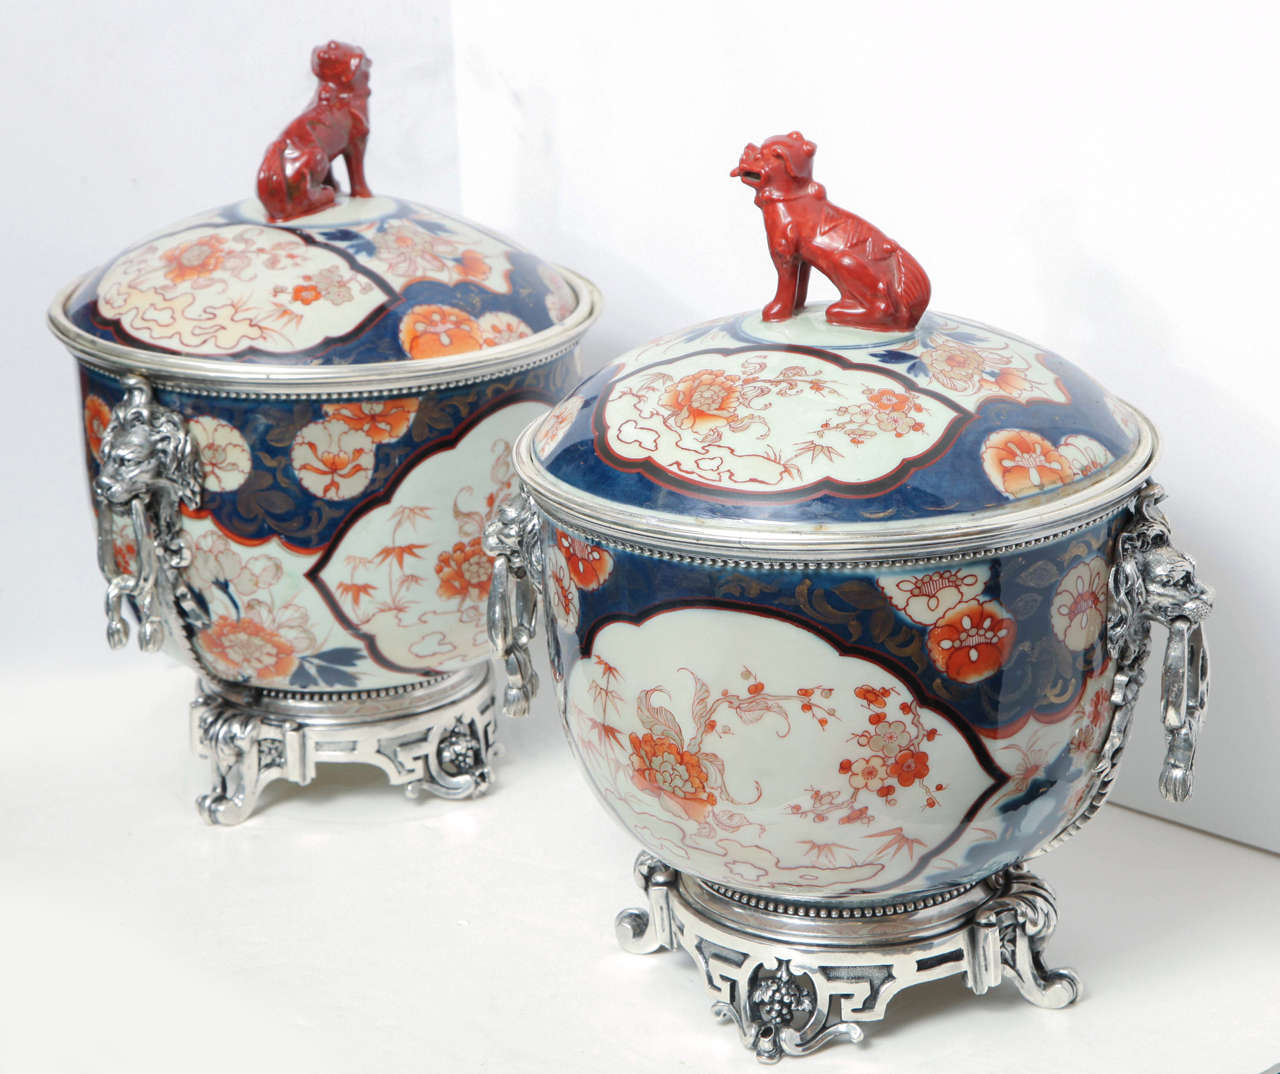 Pair of Imari Porcelain and Silvered Bronze Covered Bowl Centerpieces 4